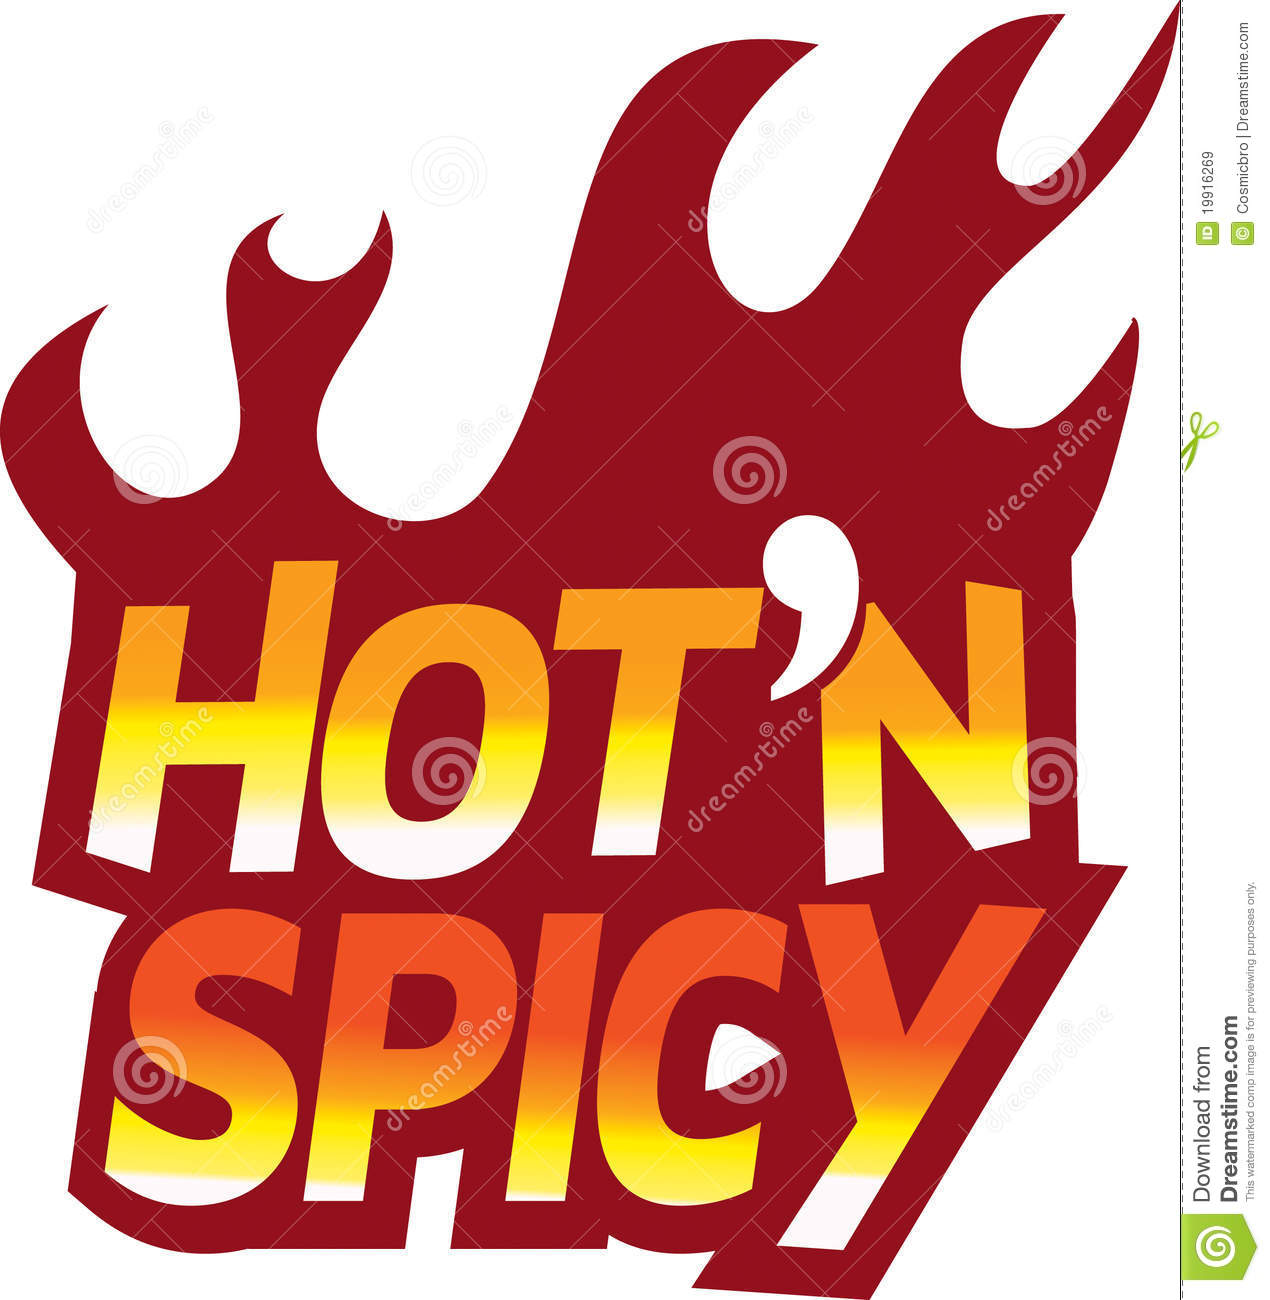 Red Hot N Spicy Flame Text Logo Icon Royalty Free Stock Images   Image